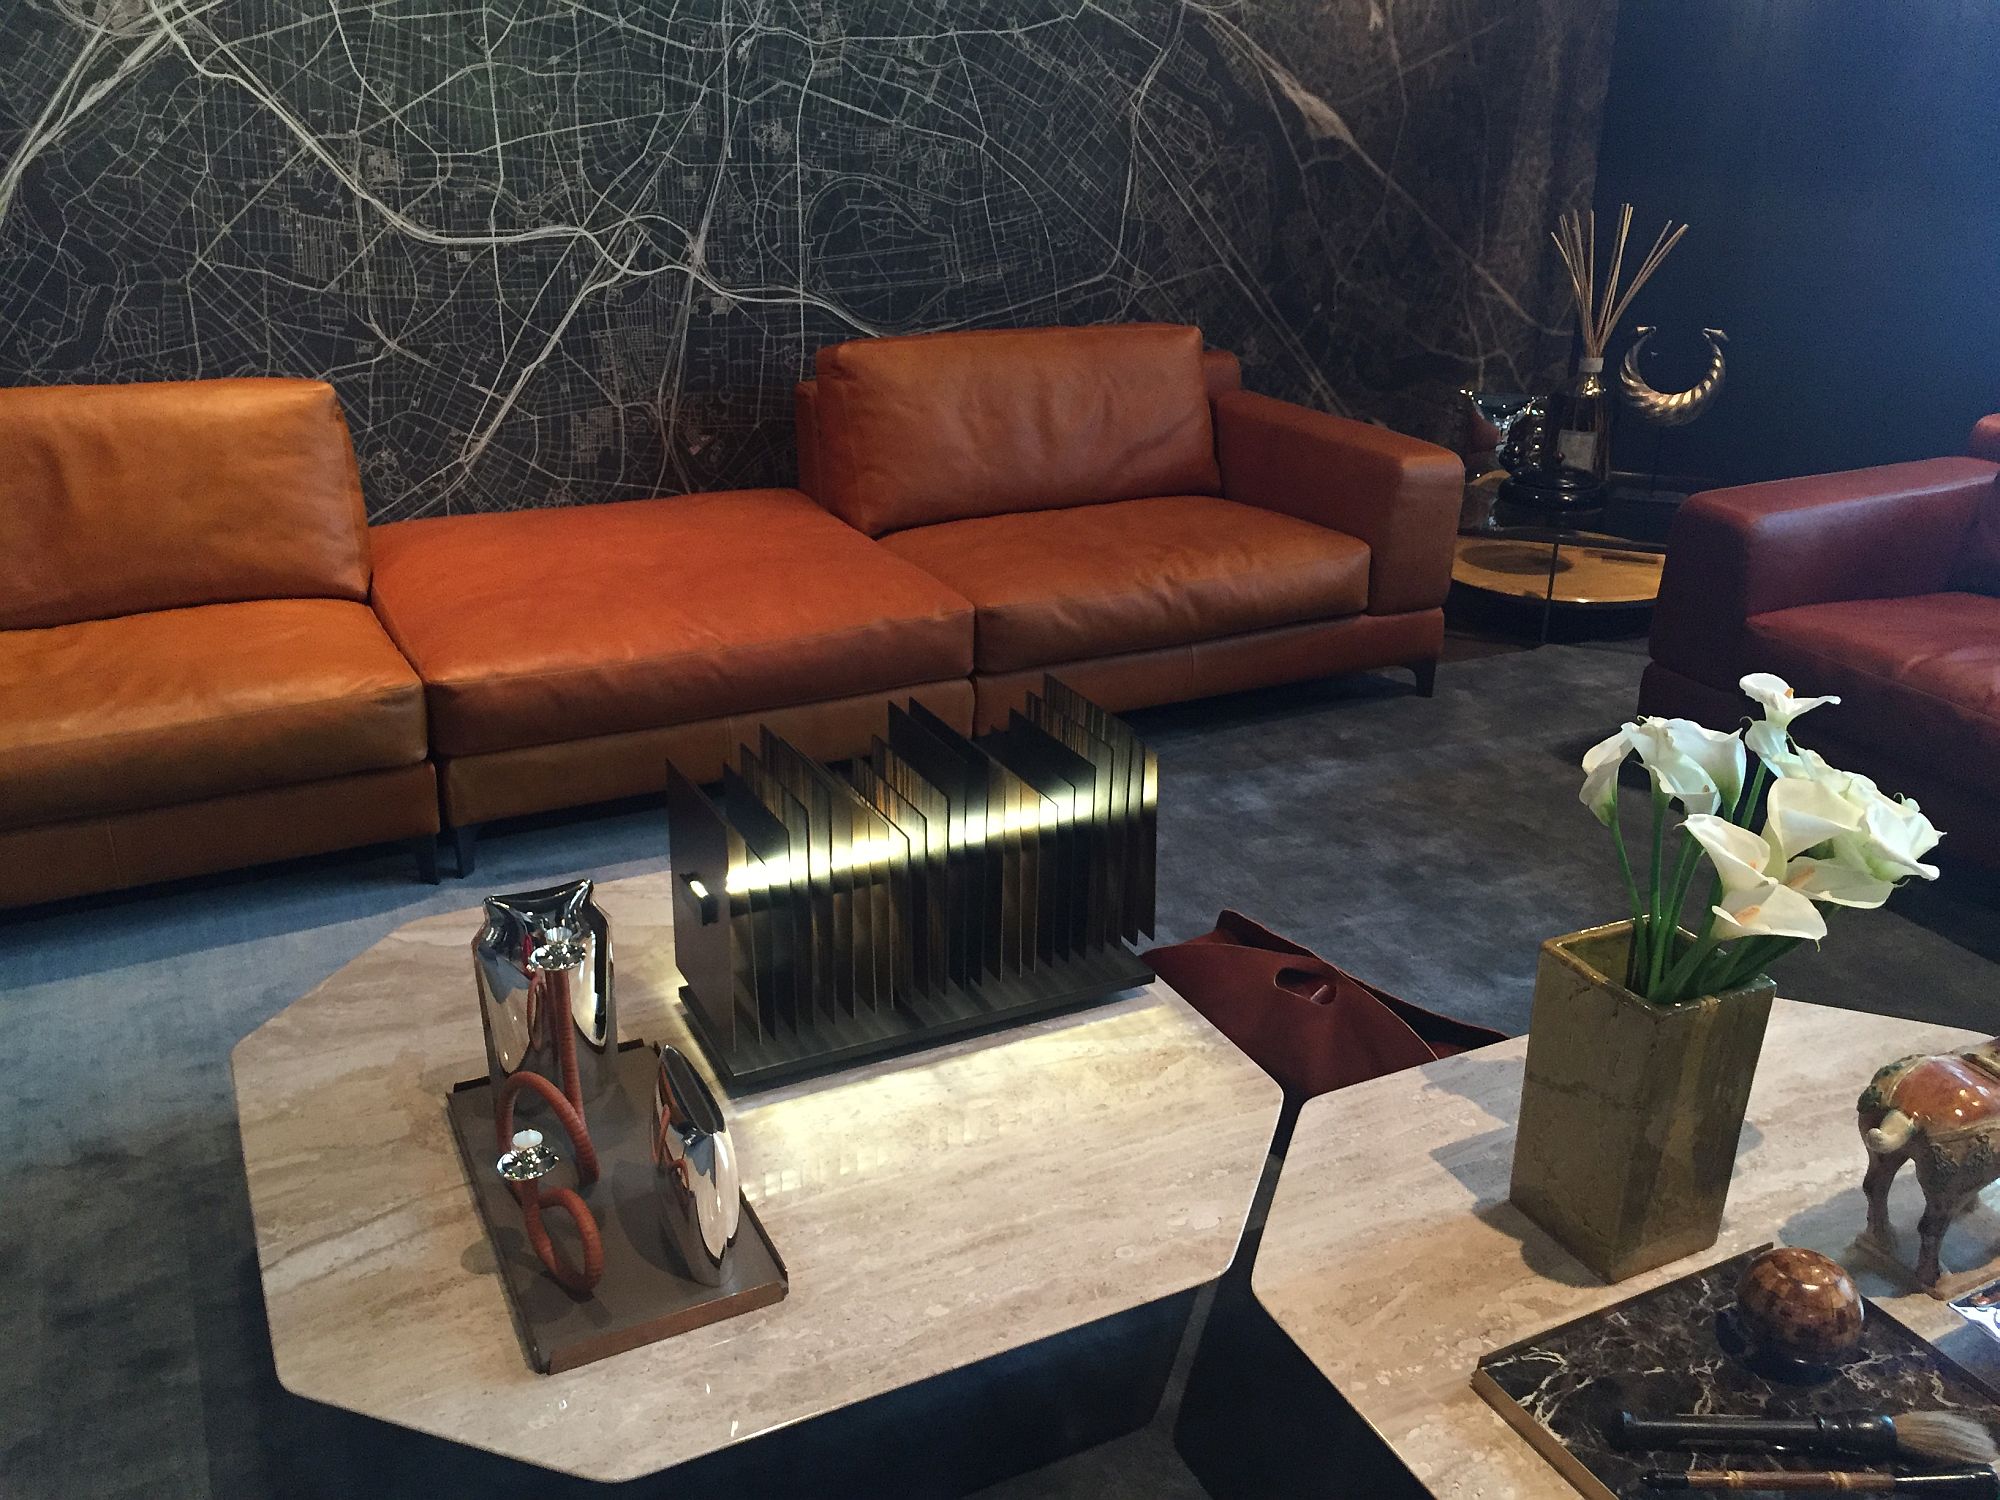 Octogonal coffee tables coupled with classy leather sofas in the living room